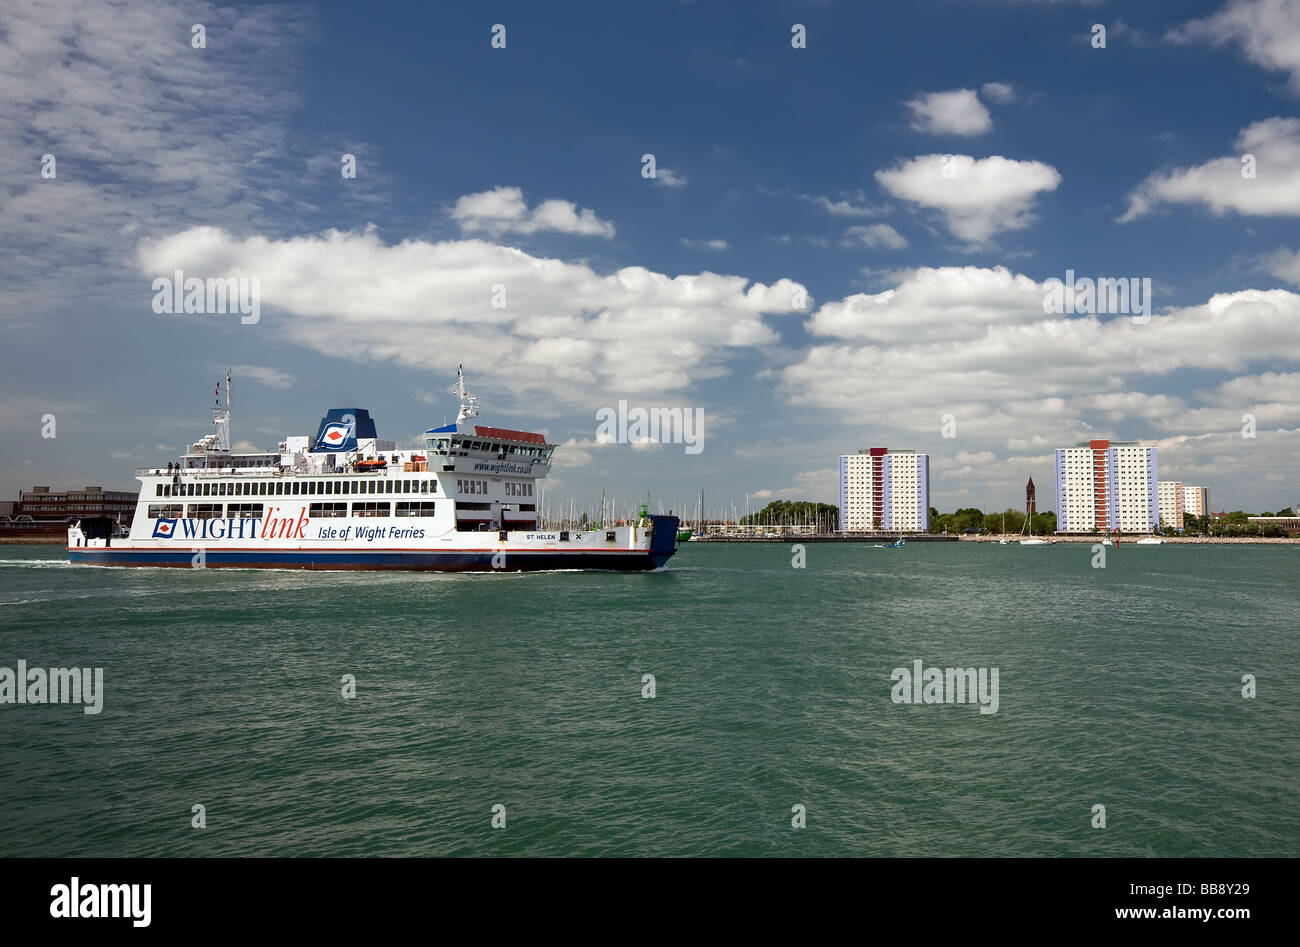 Wightlink ferry leaving Portsmouth Harbour for the Isle of Wight, Gunwharf Quays, Portsmouth Harbour, Hampshire, England, UK Stock Photo